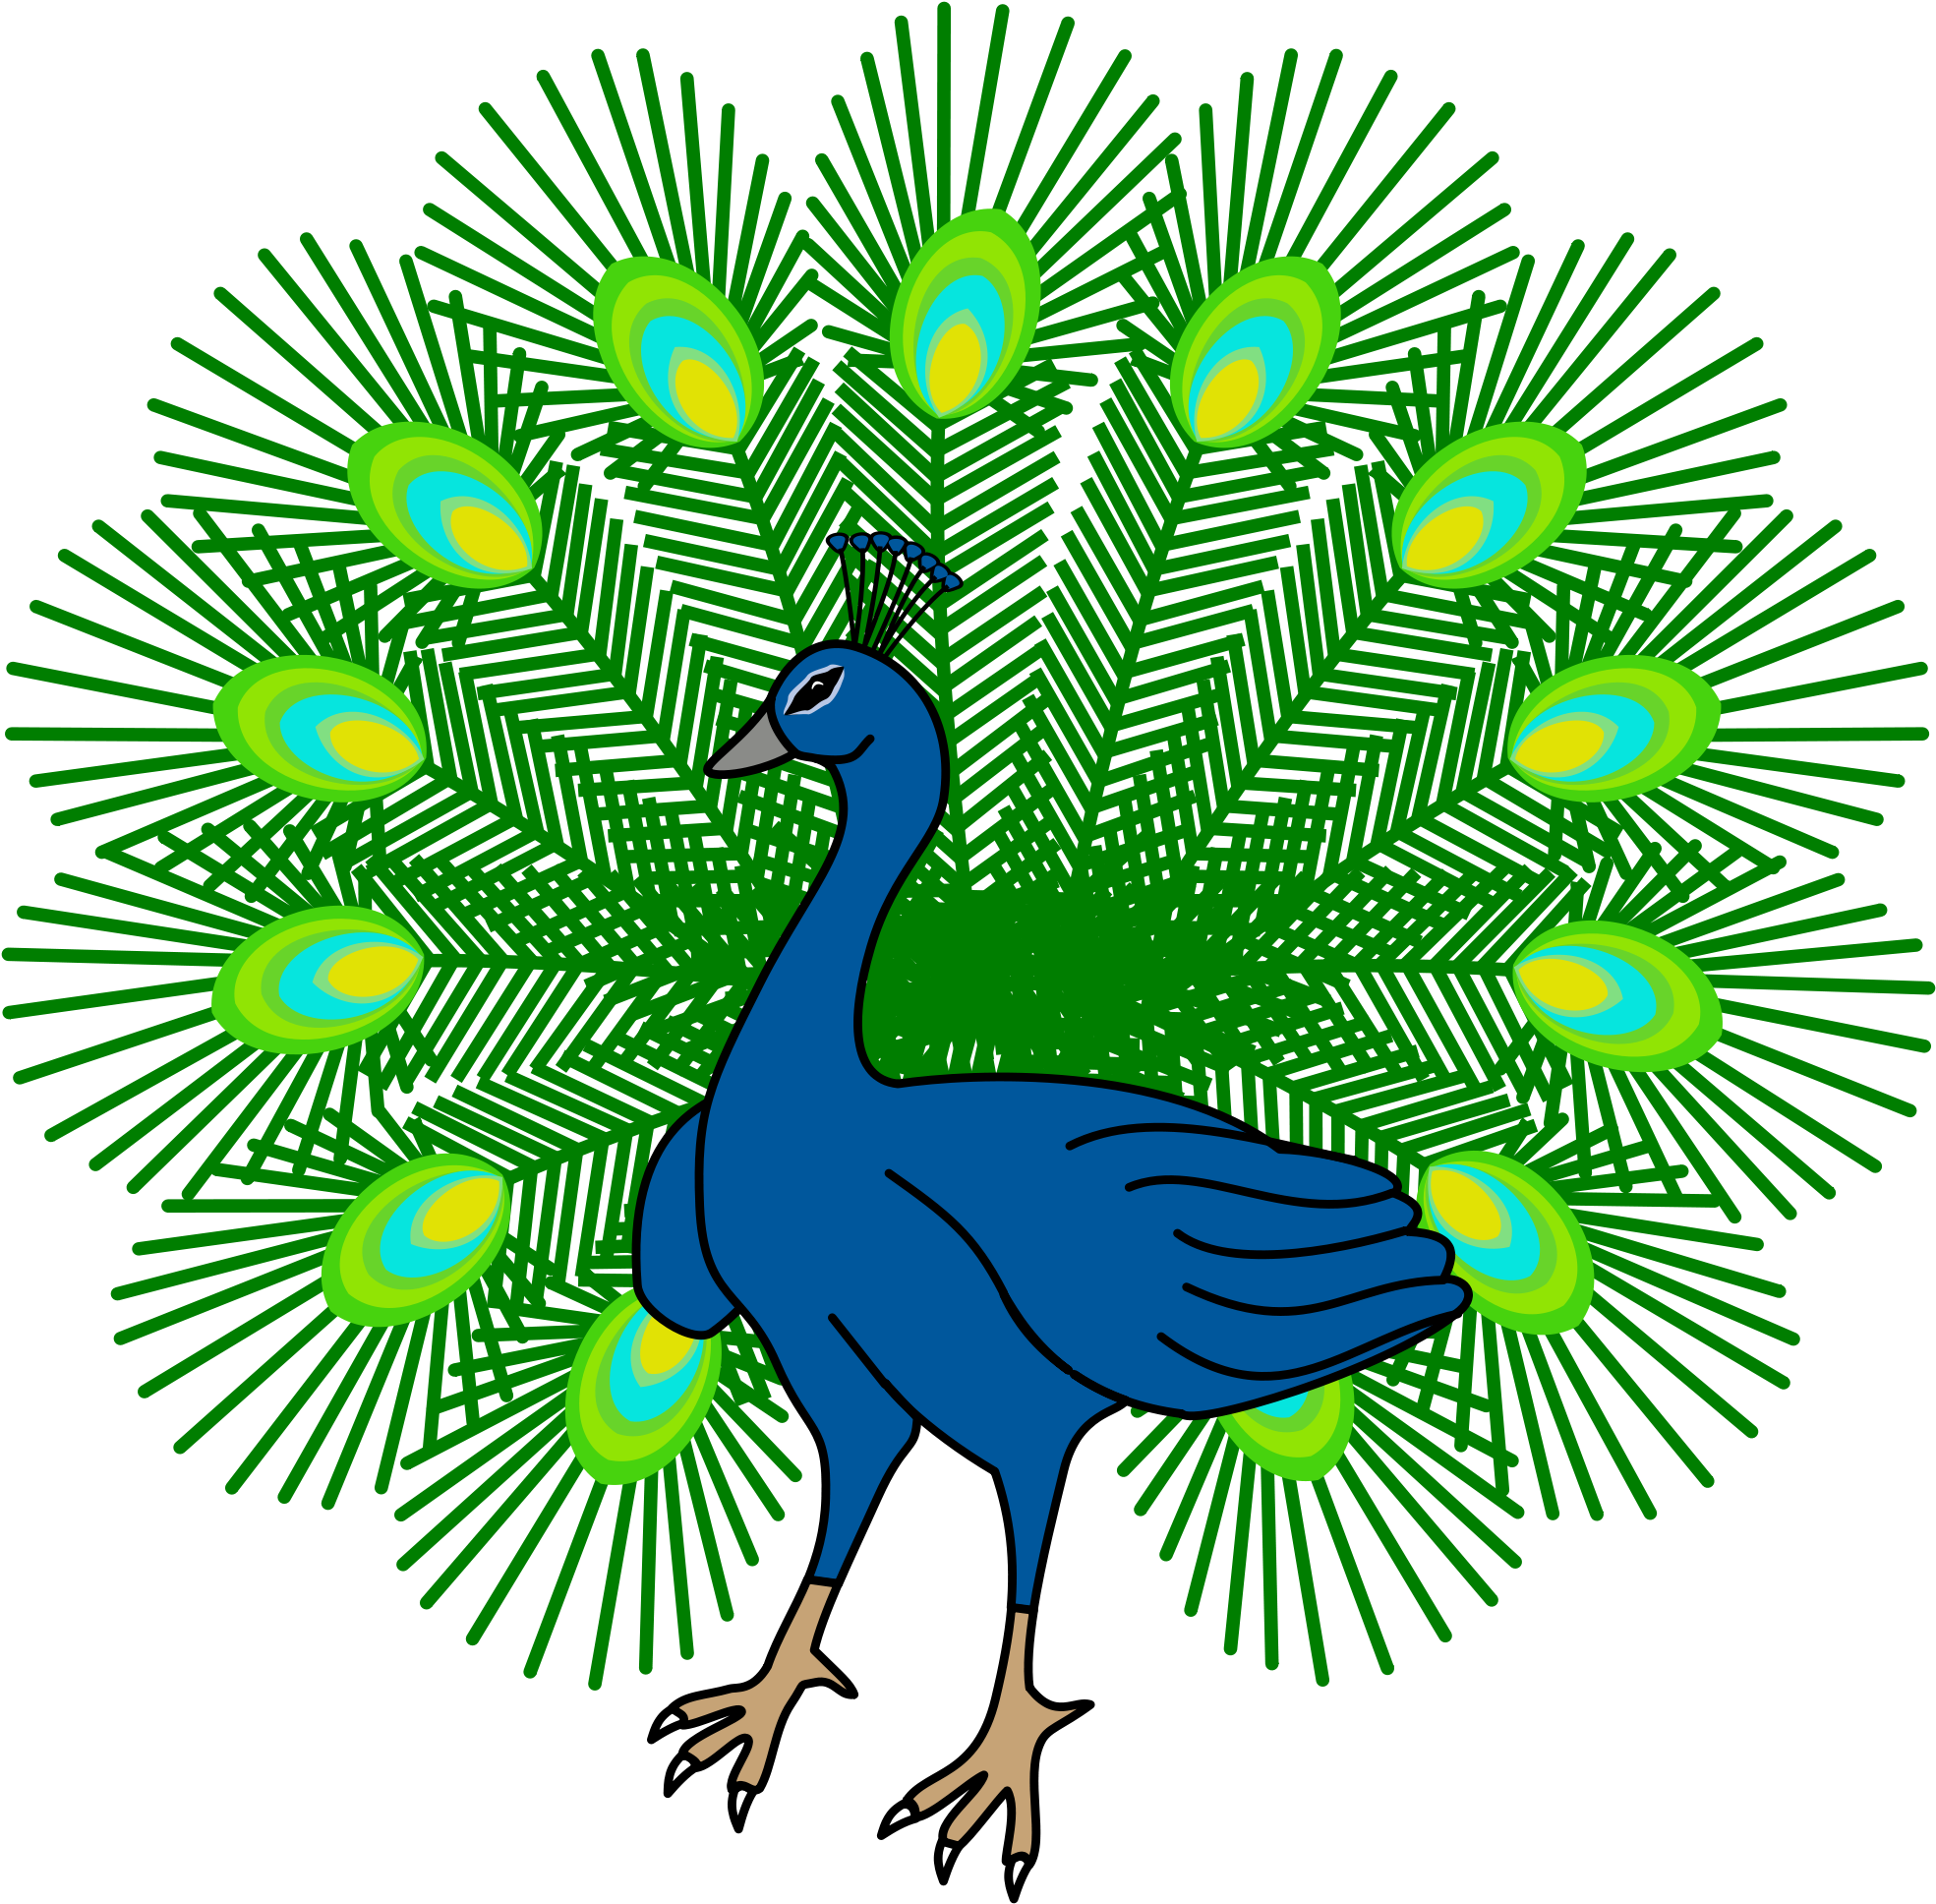 A Blue Bird With Green And Yellow Feathers